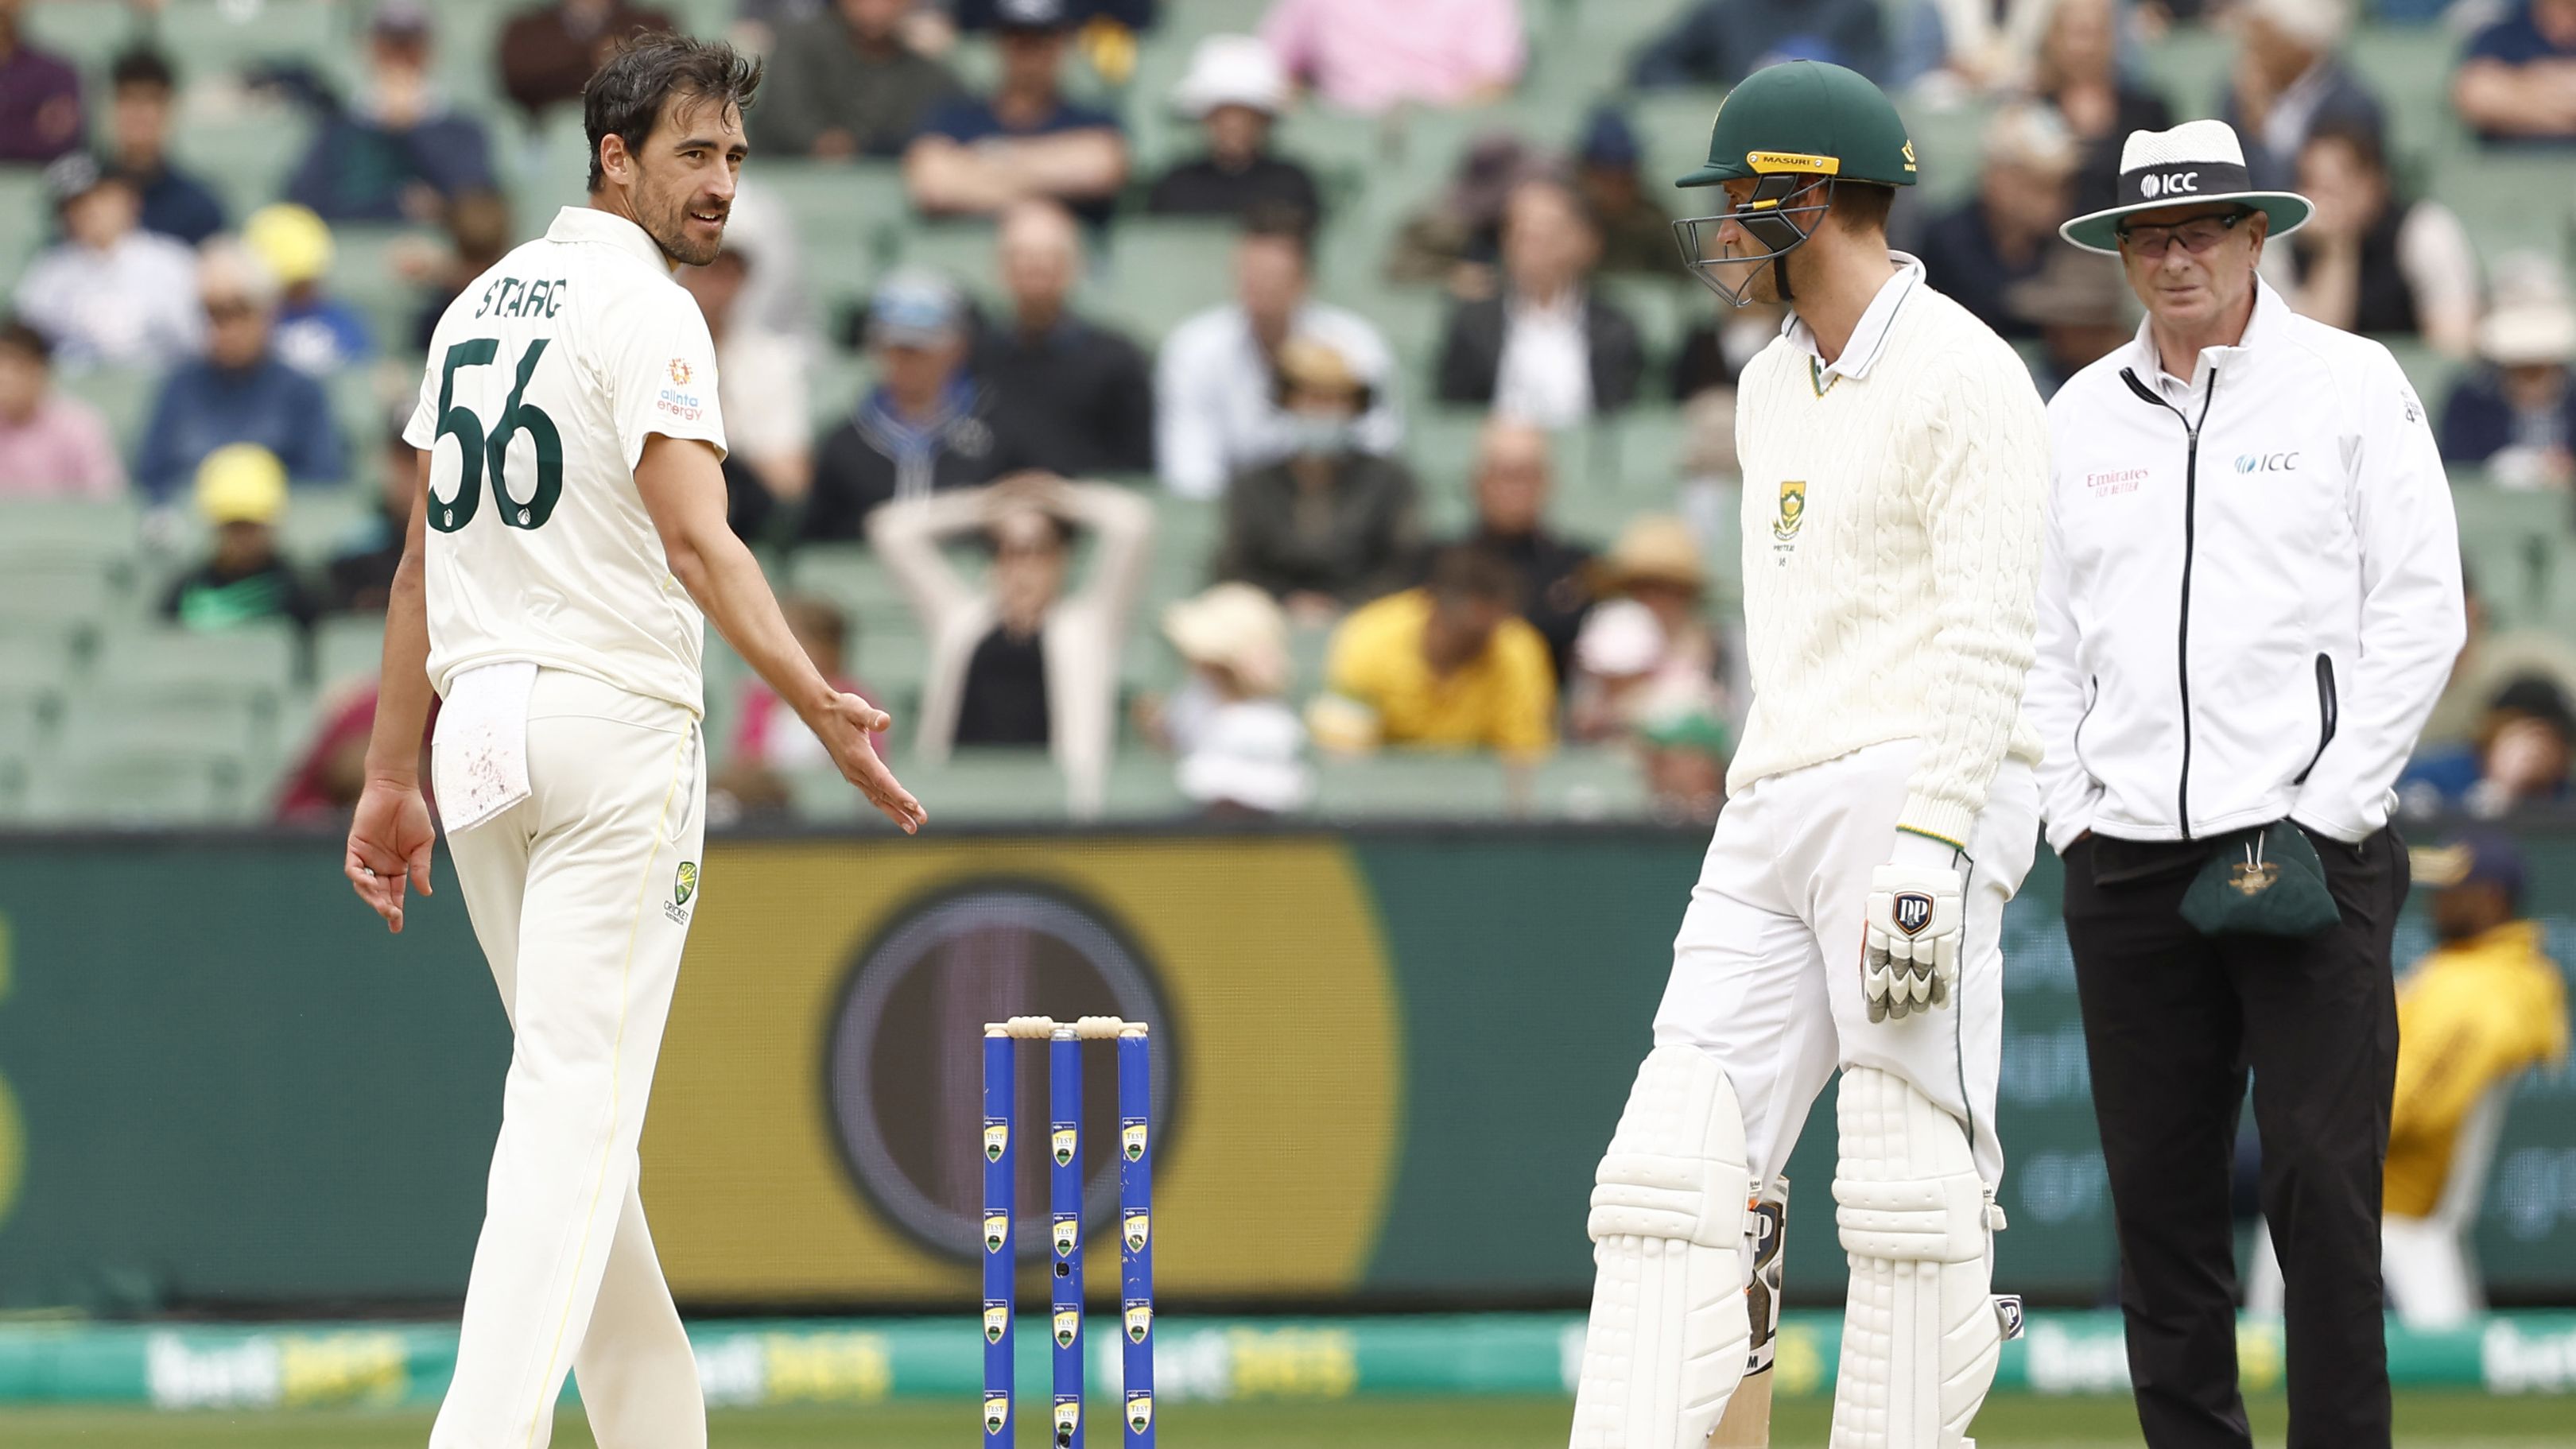 Mitchell Starc of Australia speaks to Theunis de Bruyn of South Africa about staying in his crease. (Photo by Darrian Traynor - CA/Cricket Australia via Getty Images)